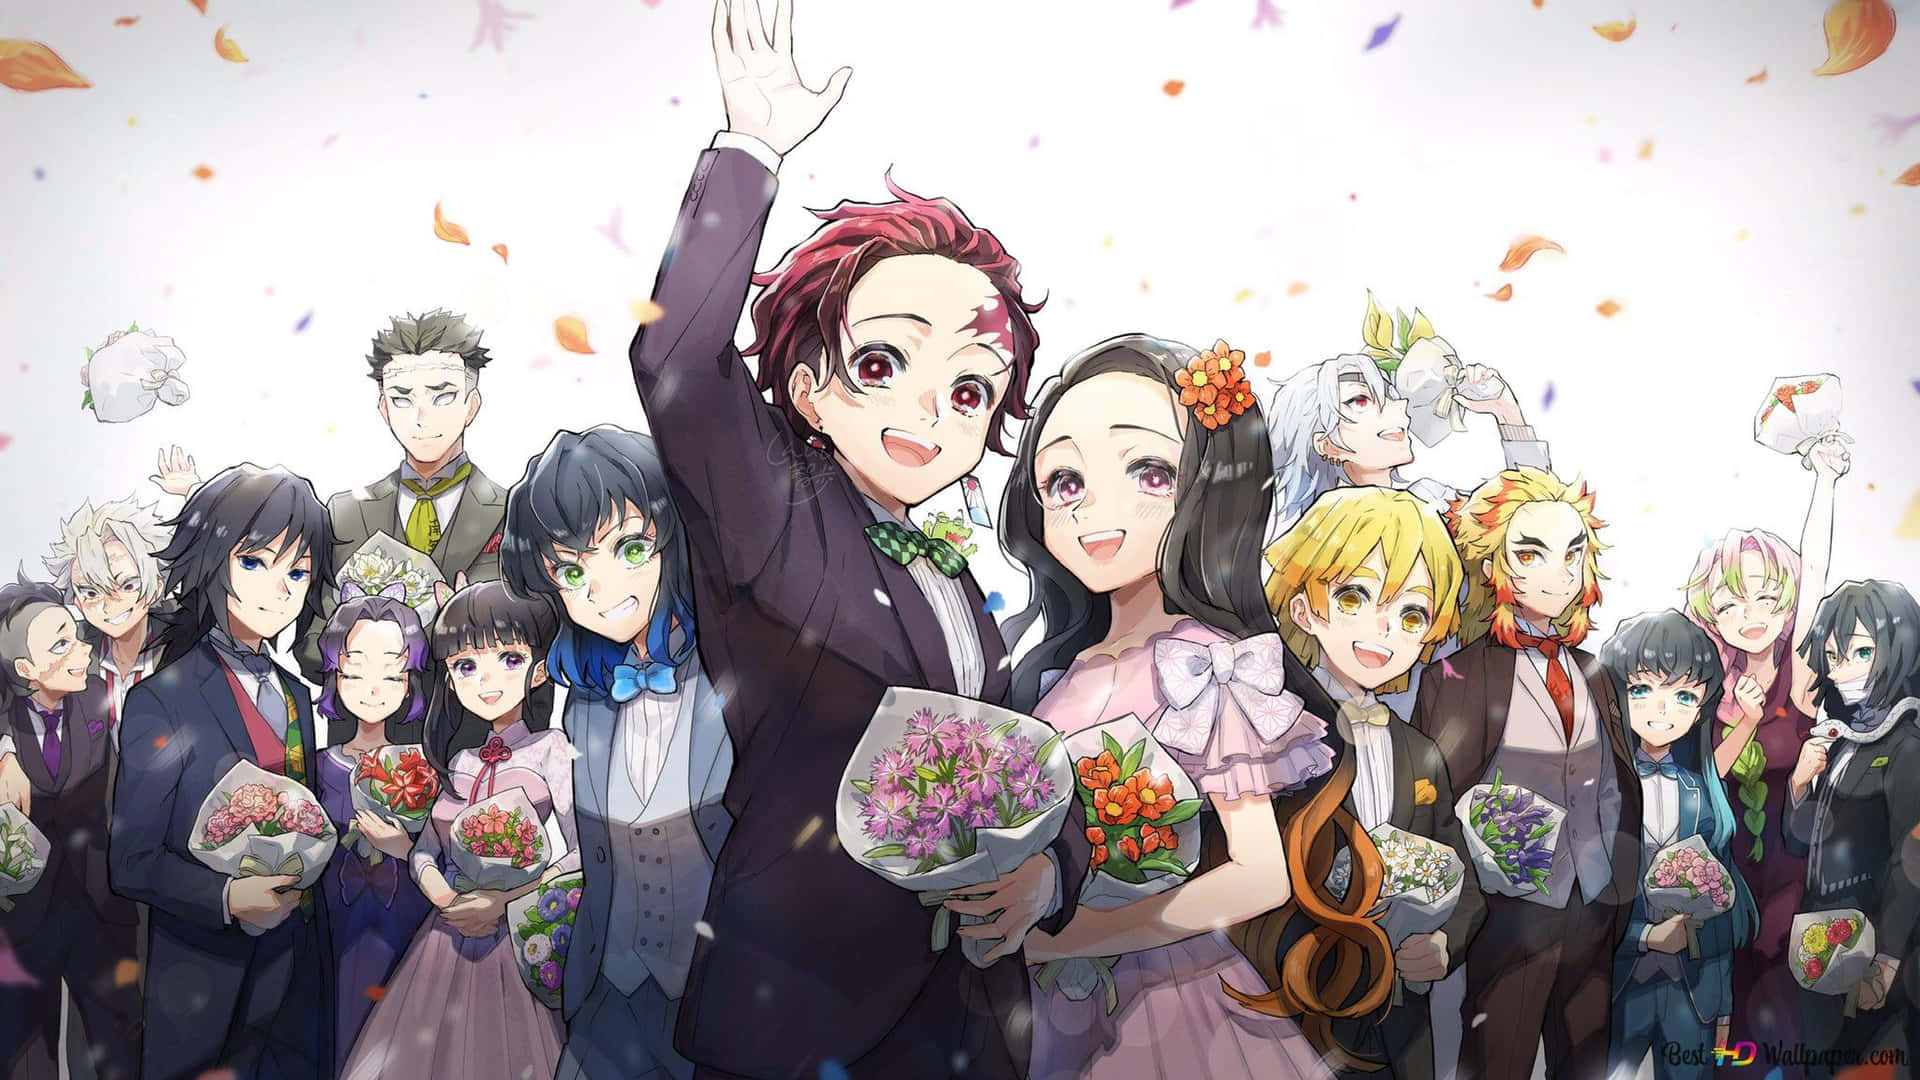 A Group Of Anime Characters With Flowers In Their Hands Wallpaper